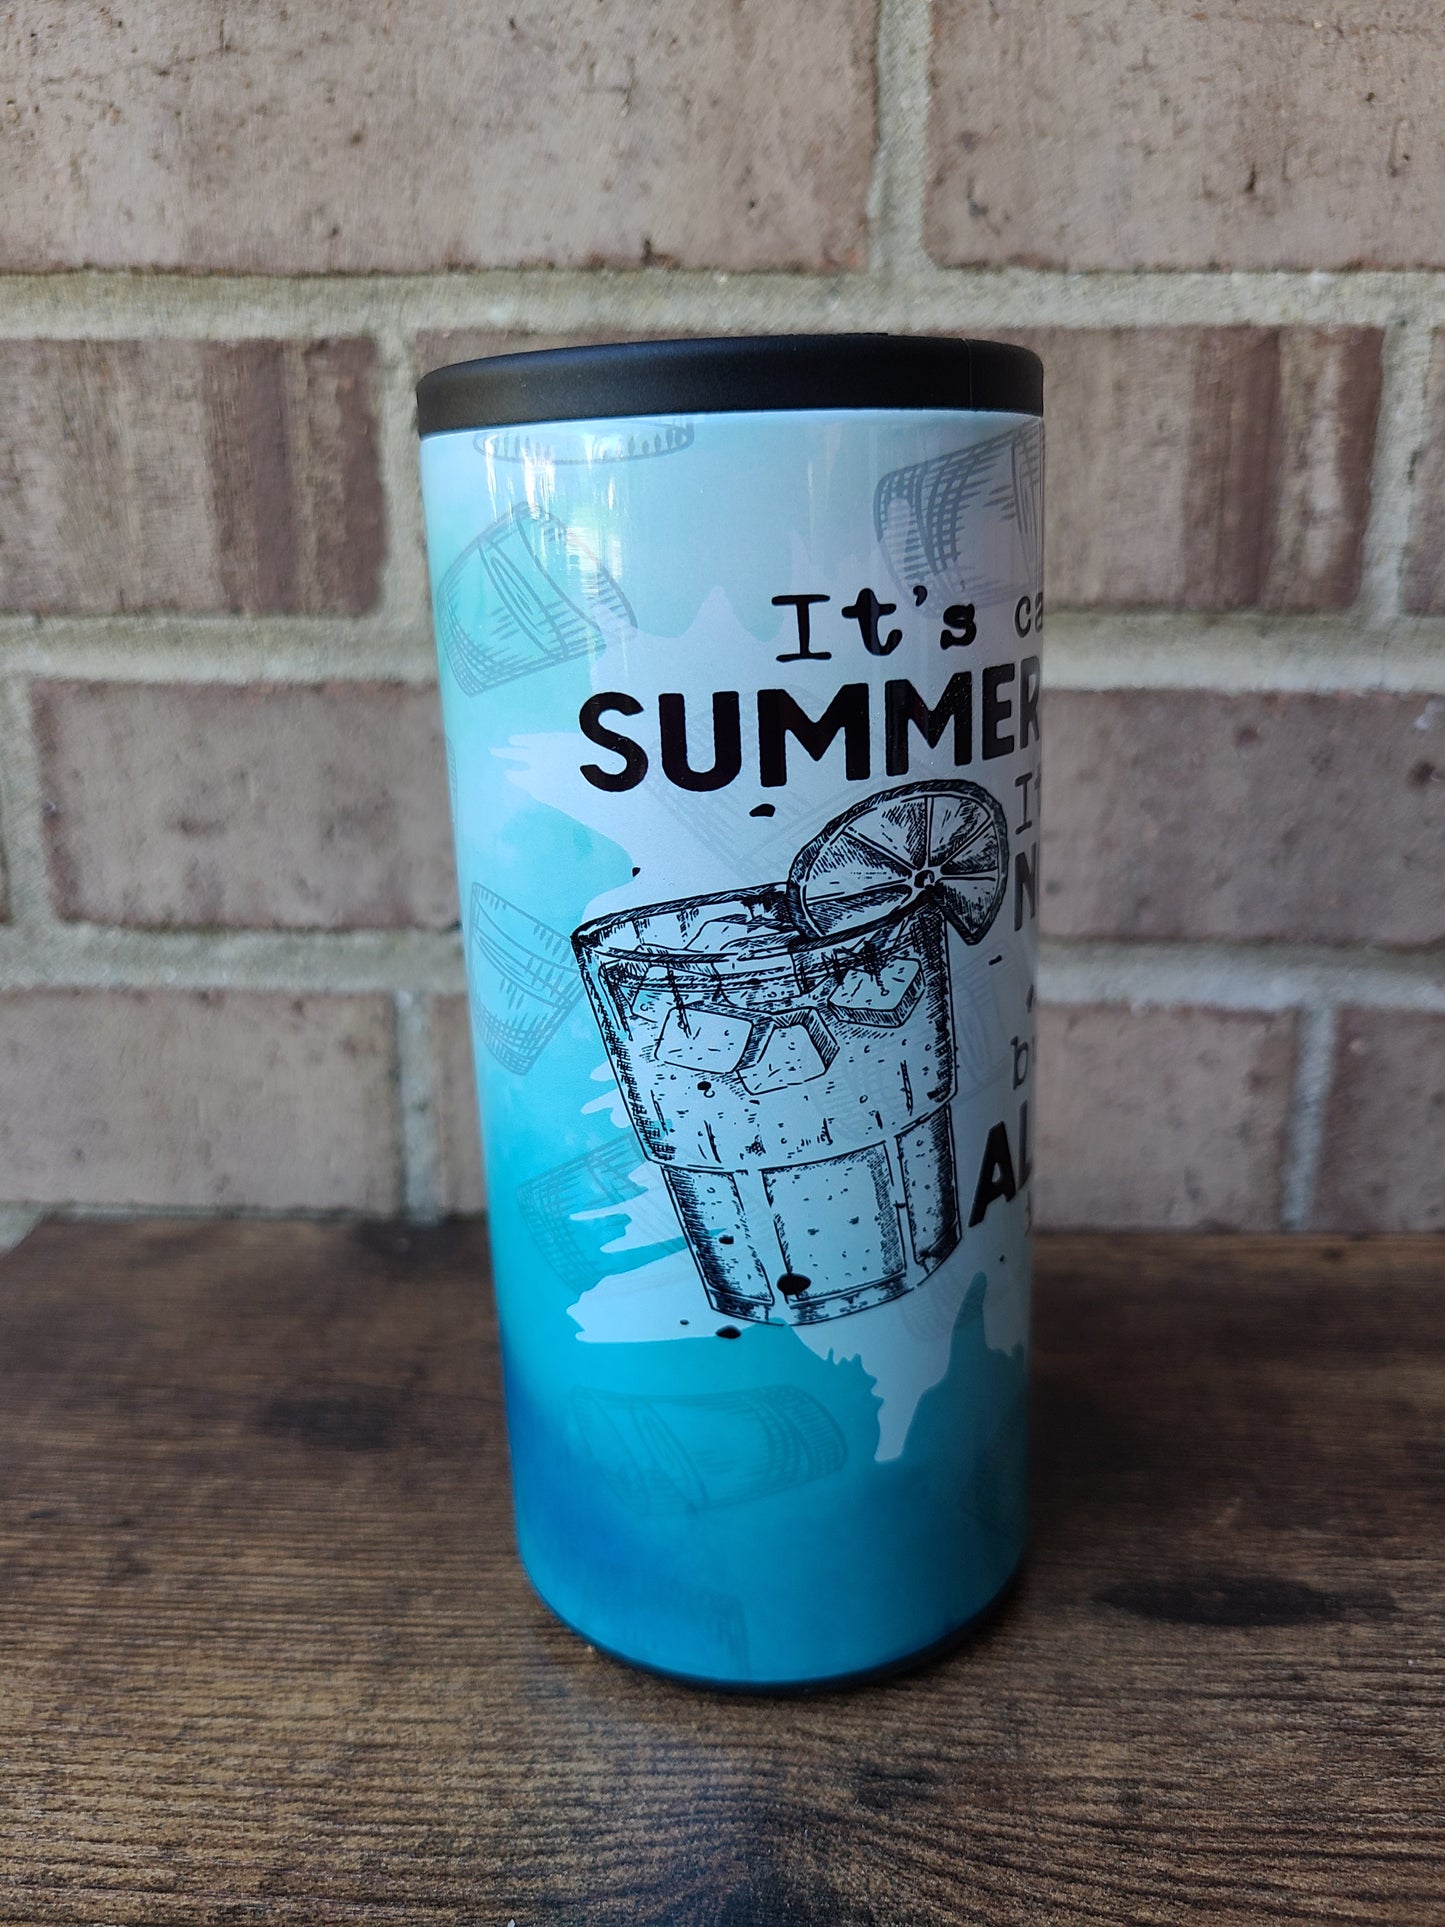 Summer Water with Alcohol Skinny Can Cooler